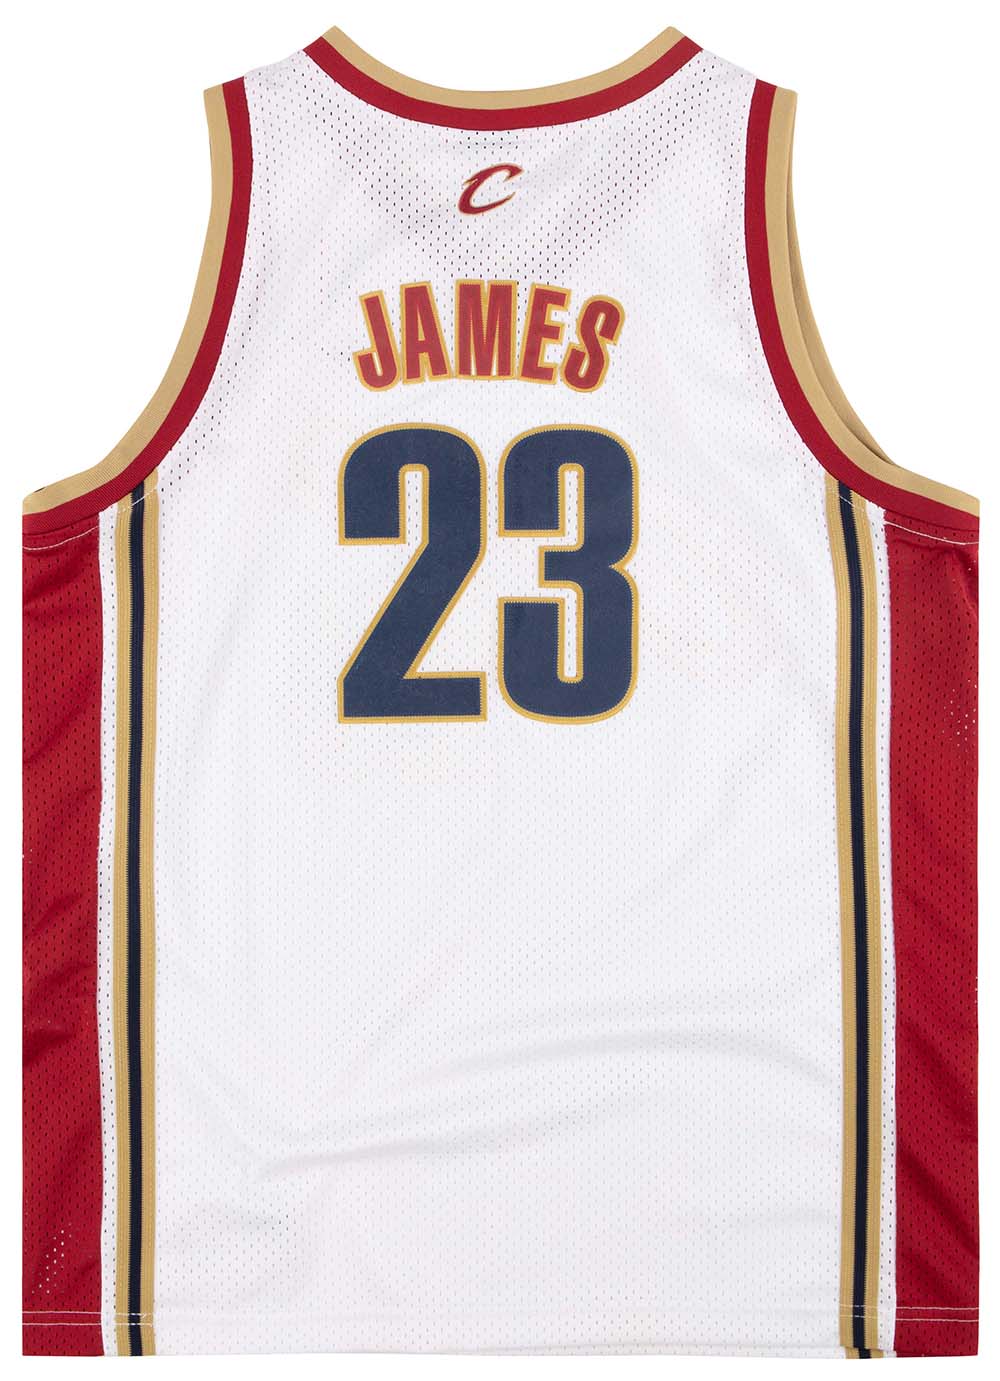 Cleveland Cavaliers LeBron James #23 - Jersey - Stitched XL Length